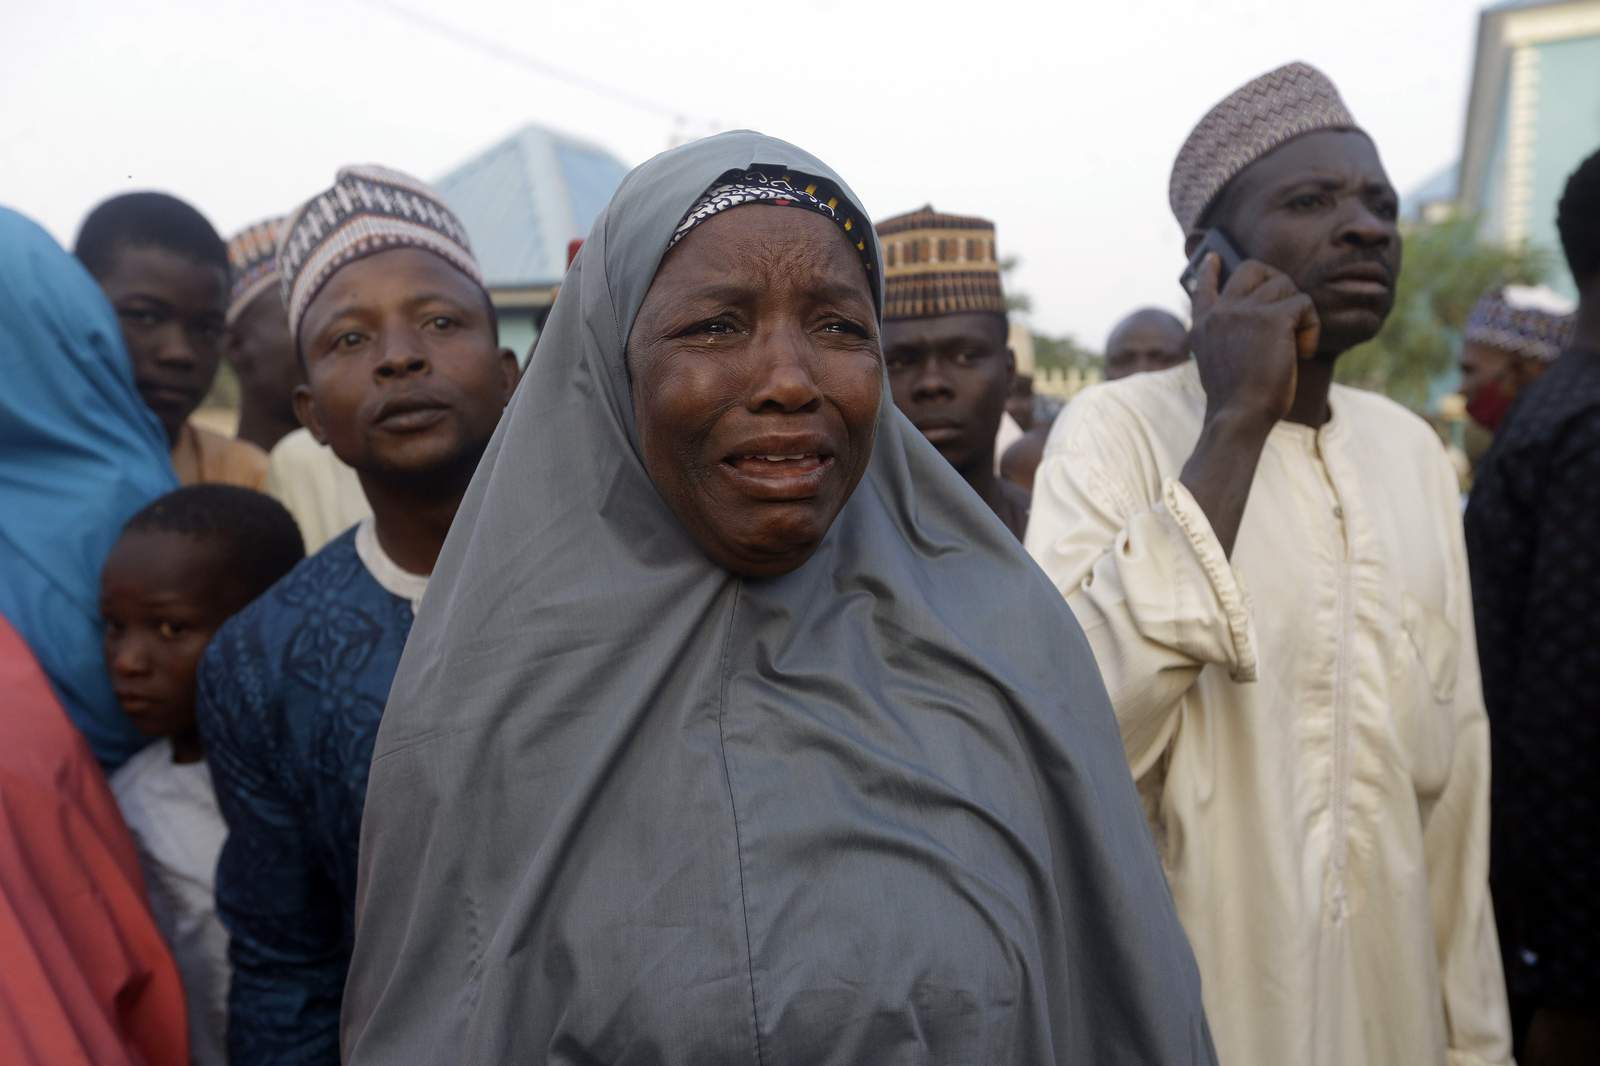 Freed Nigerian schoolboys welcomed; calls for more security